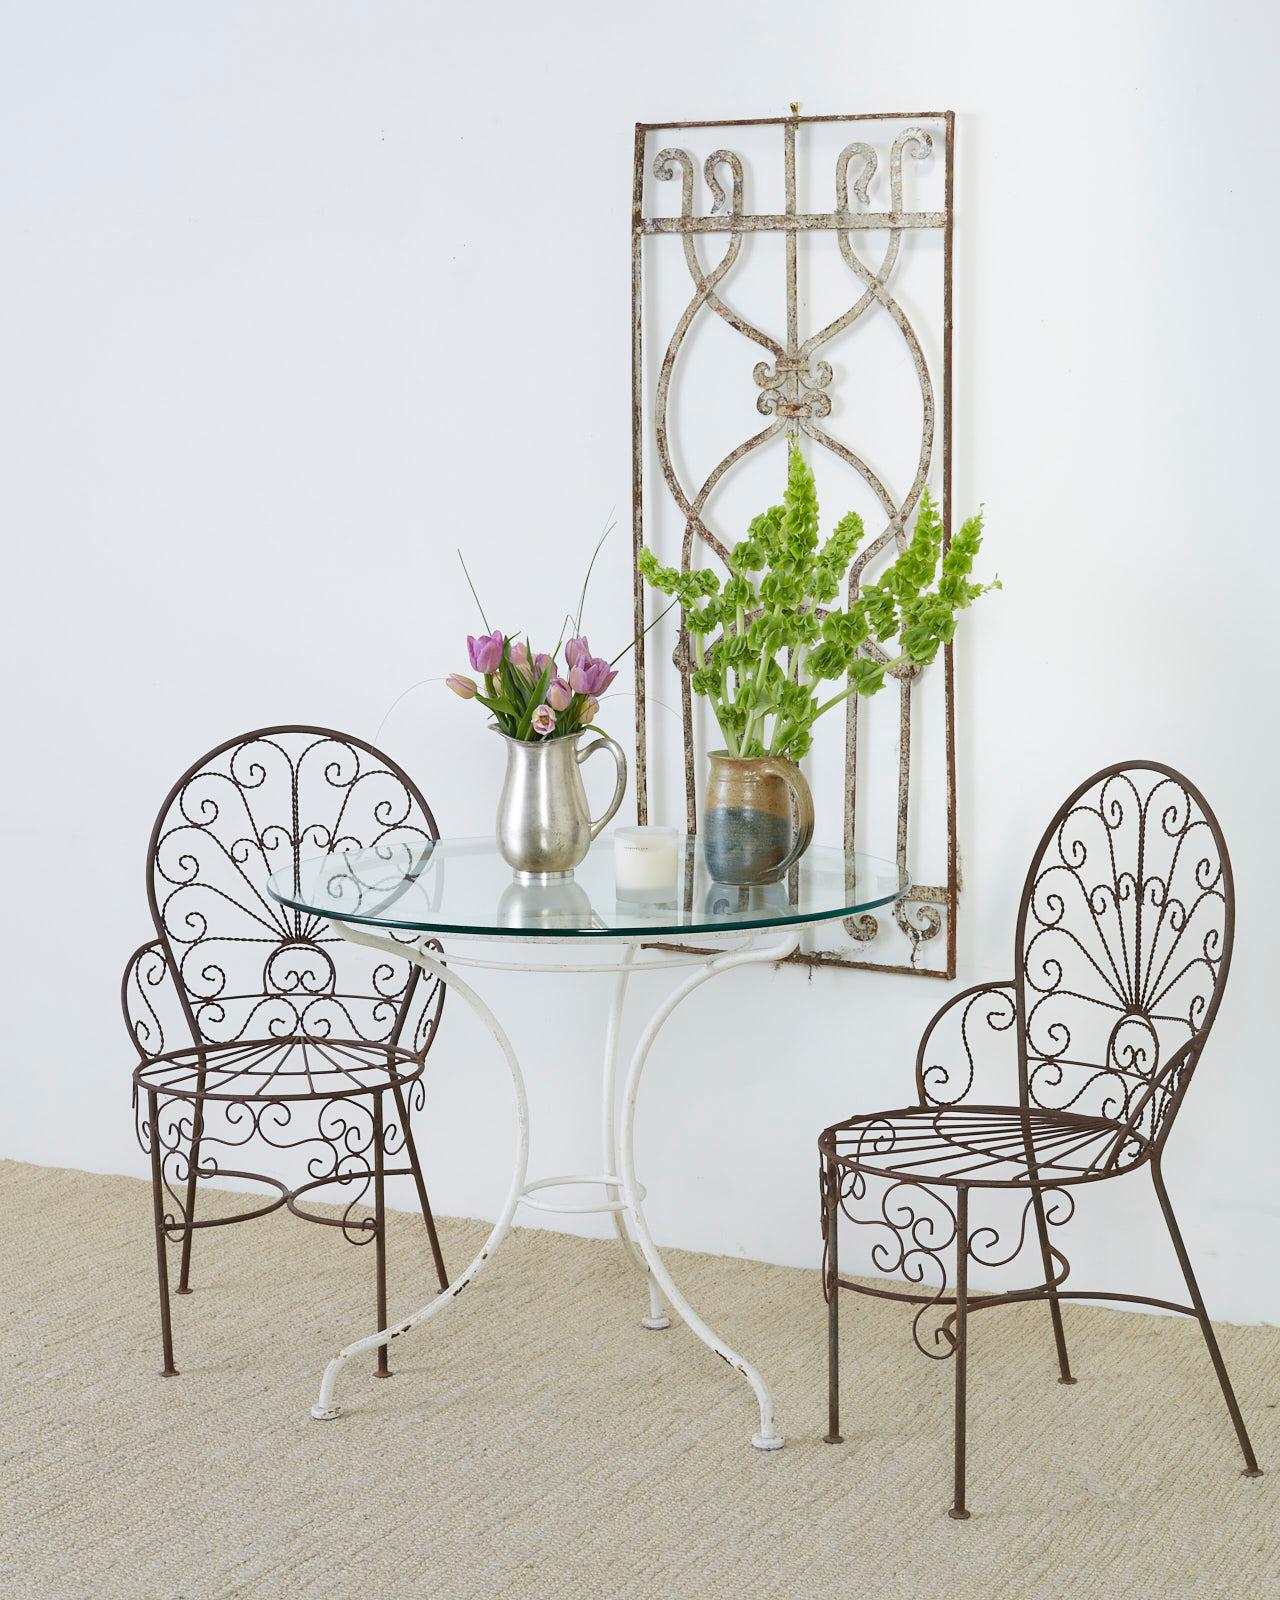 Set of four stunning iron garden or patio chairs featuring a fan back or peacock style. Made in the manner of Salterini. These chairs are handcrafted from wrought iron. Decorative scrolls made of twisted wire fill the backs and seat apron. The